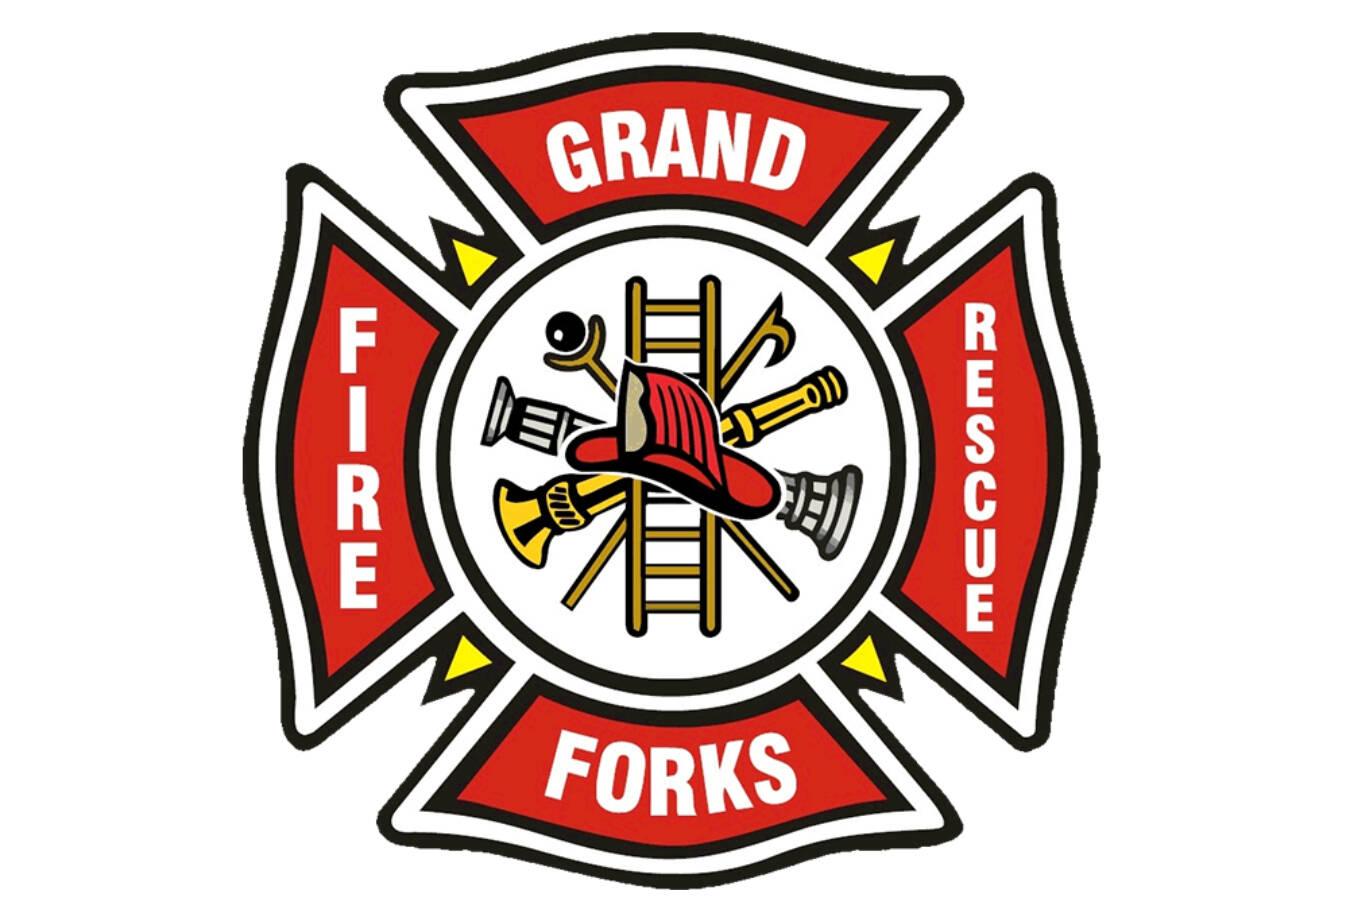 Grand Forks emergency services put out five separate fires on March 23 and 24.